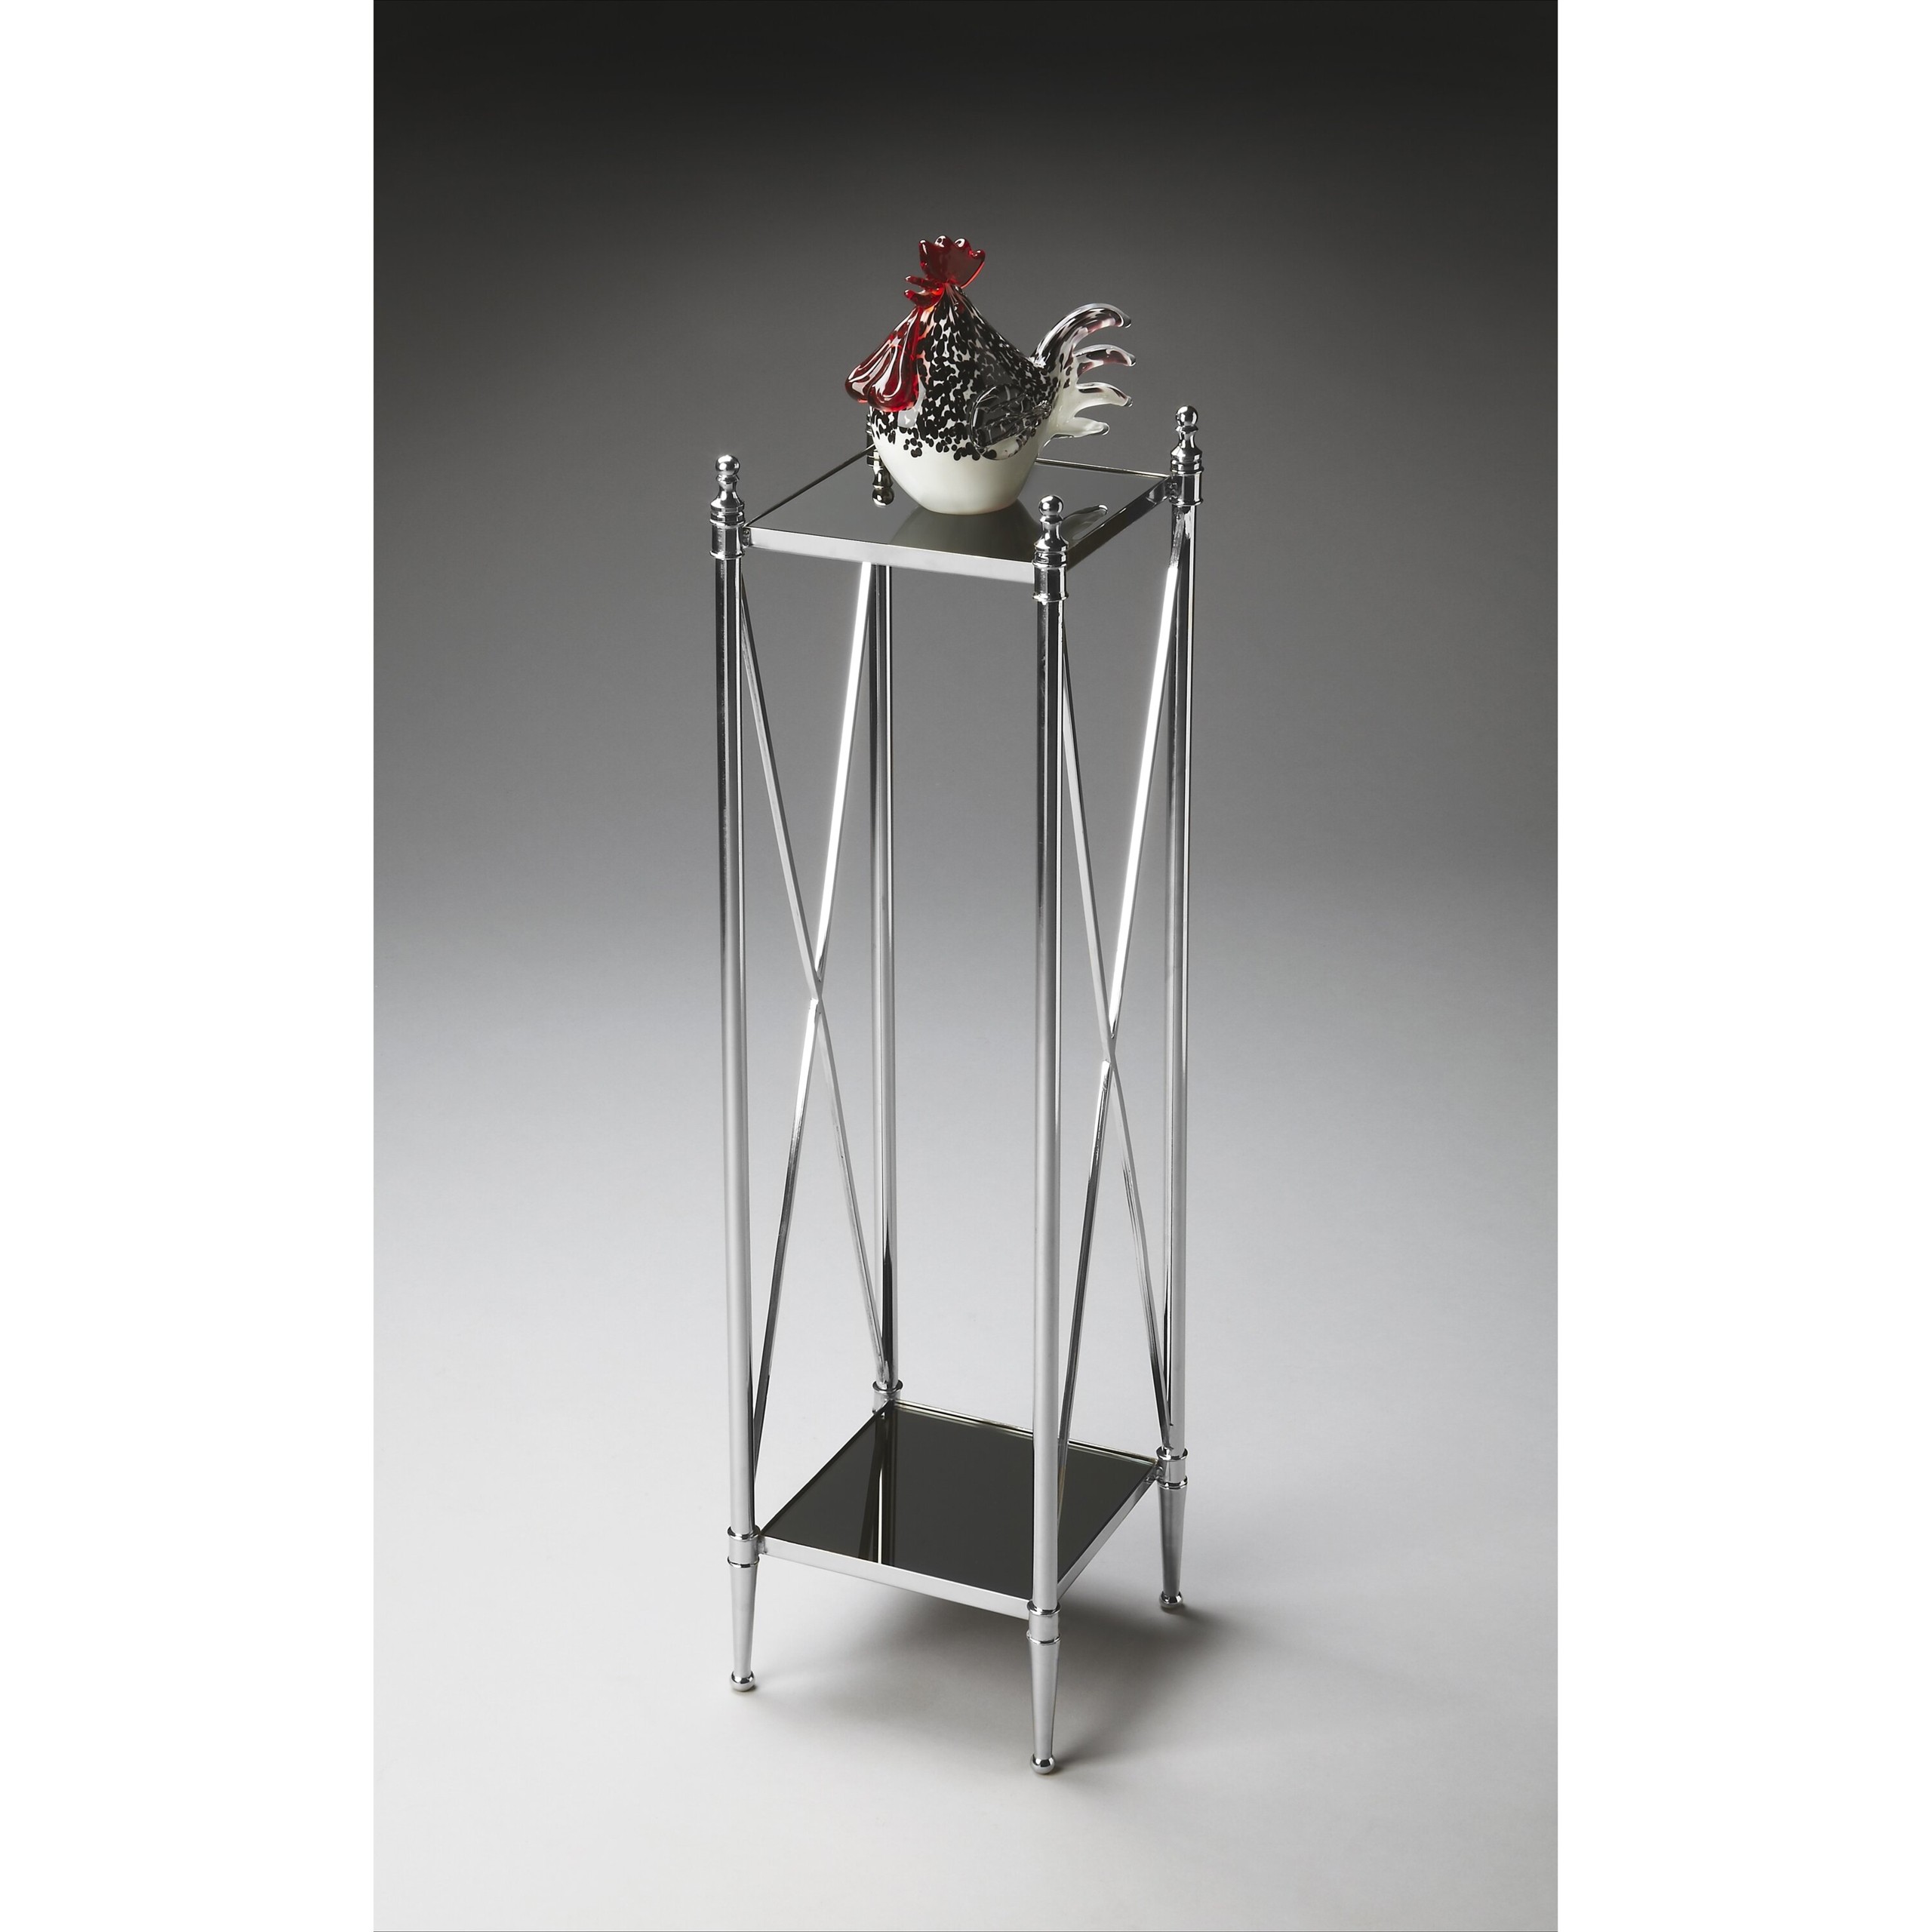 Butler modern expressions multi tiered plant stand